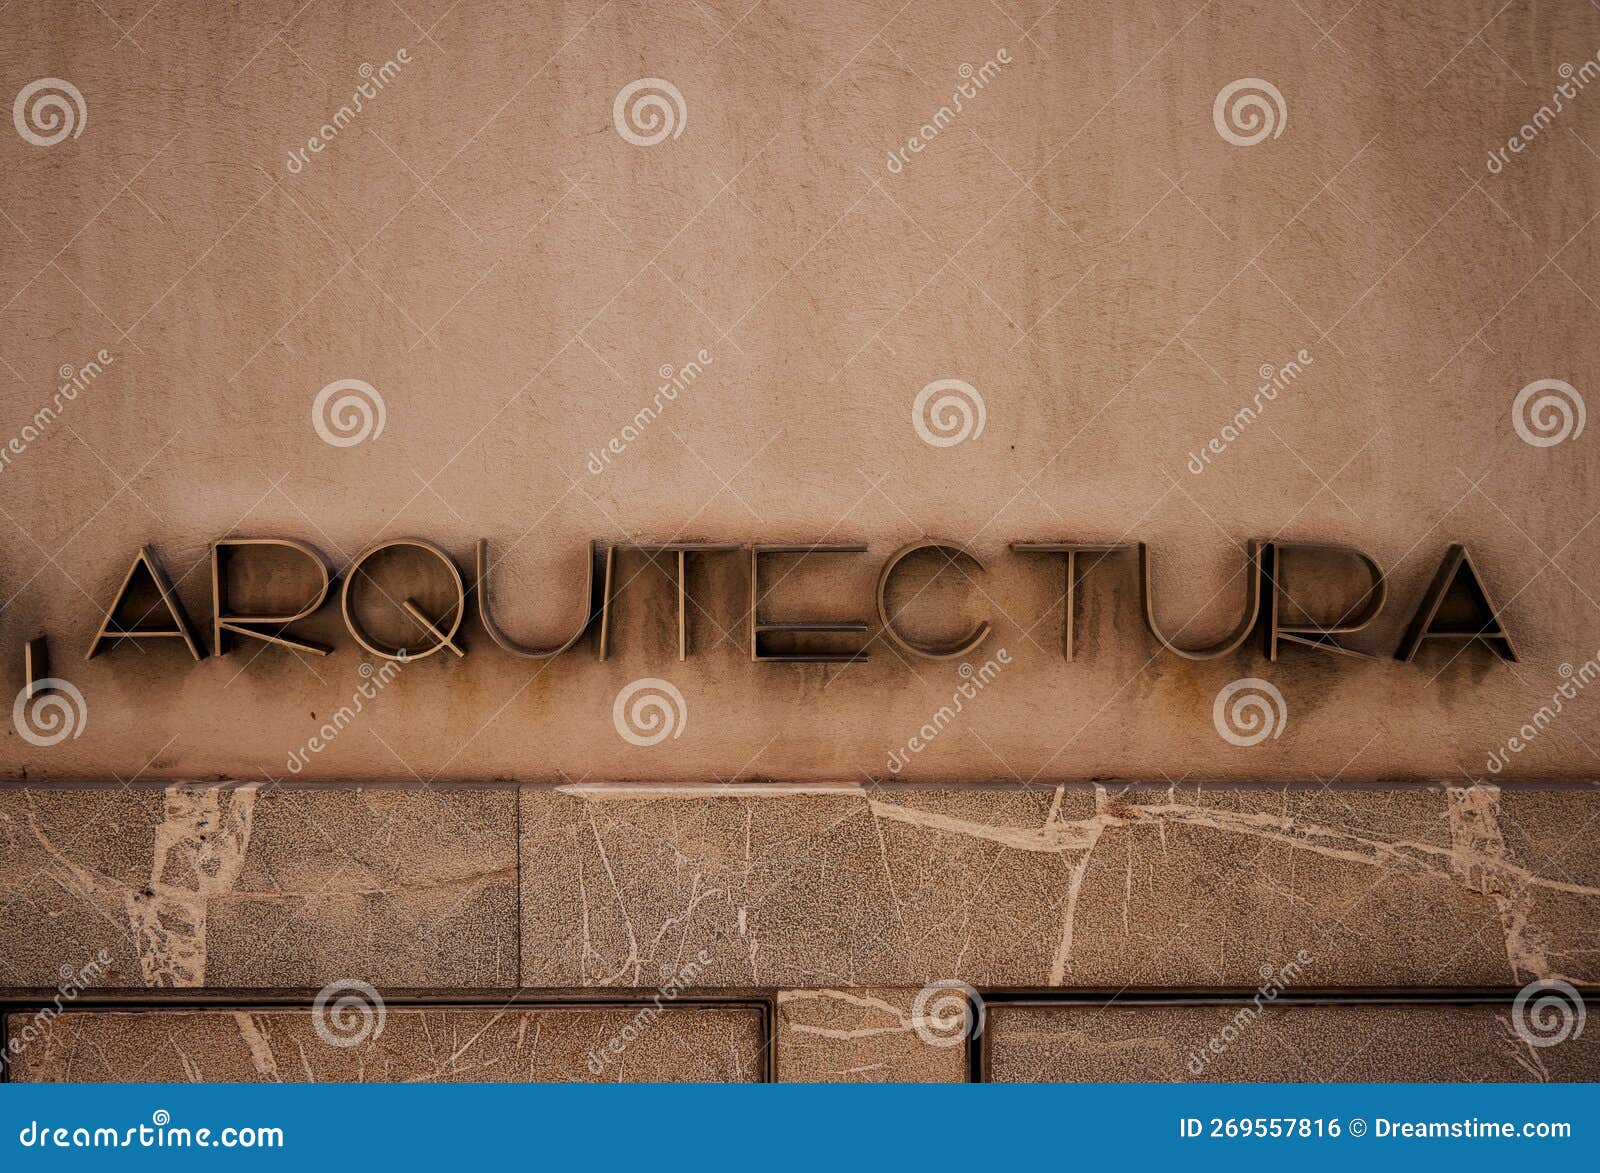 spanish arquitectura word meaning architecture on a stone facade wall